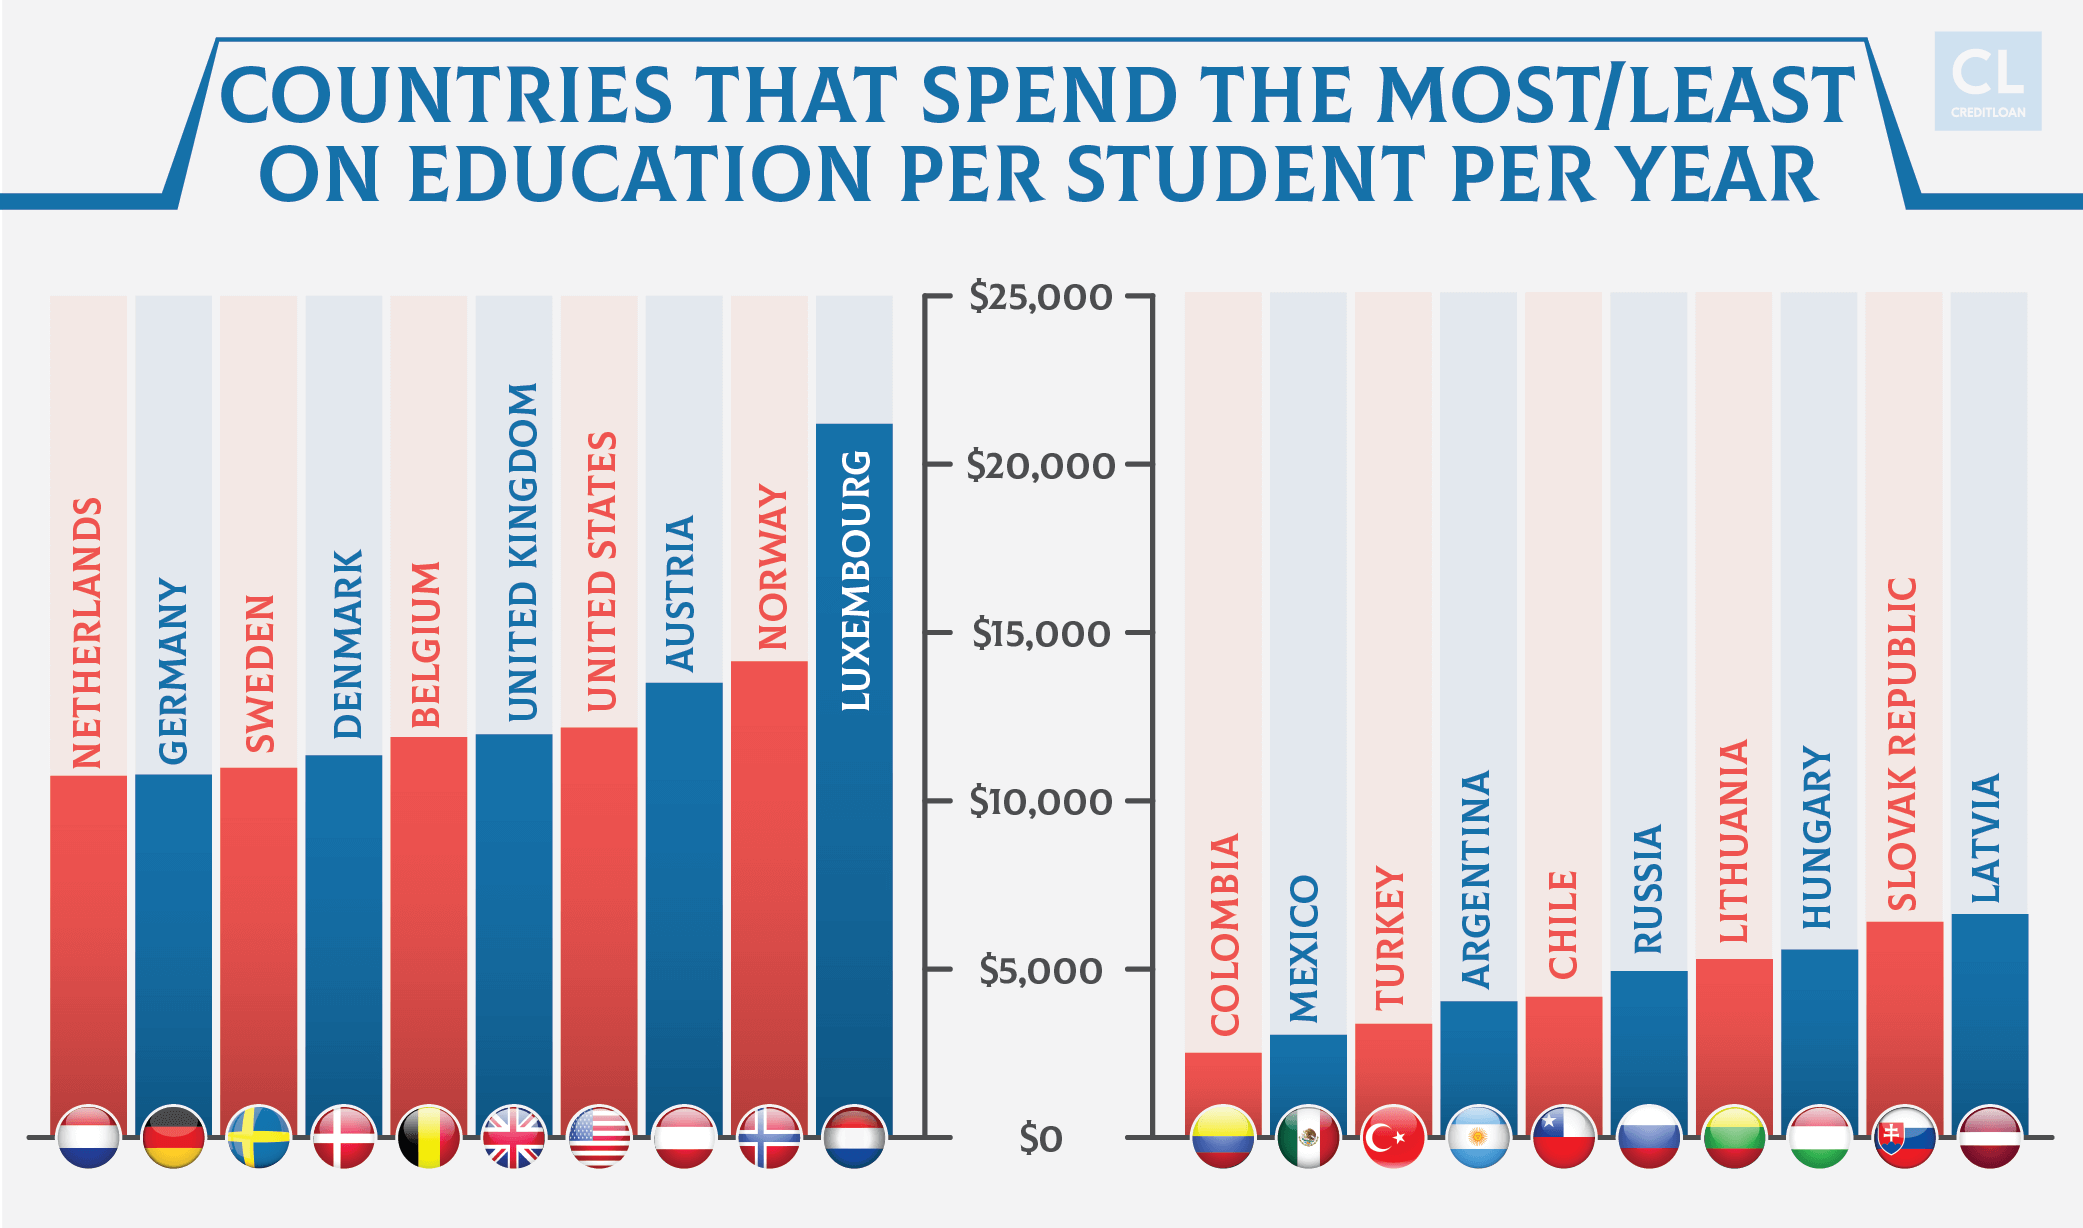 Countries that Spend the Most on Education per student per year